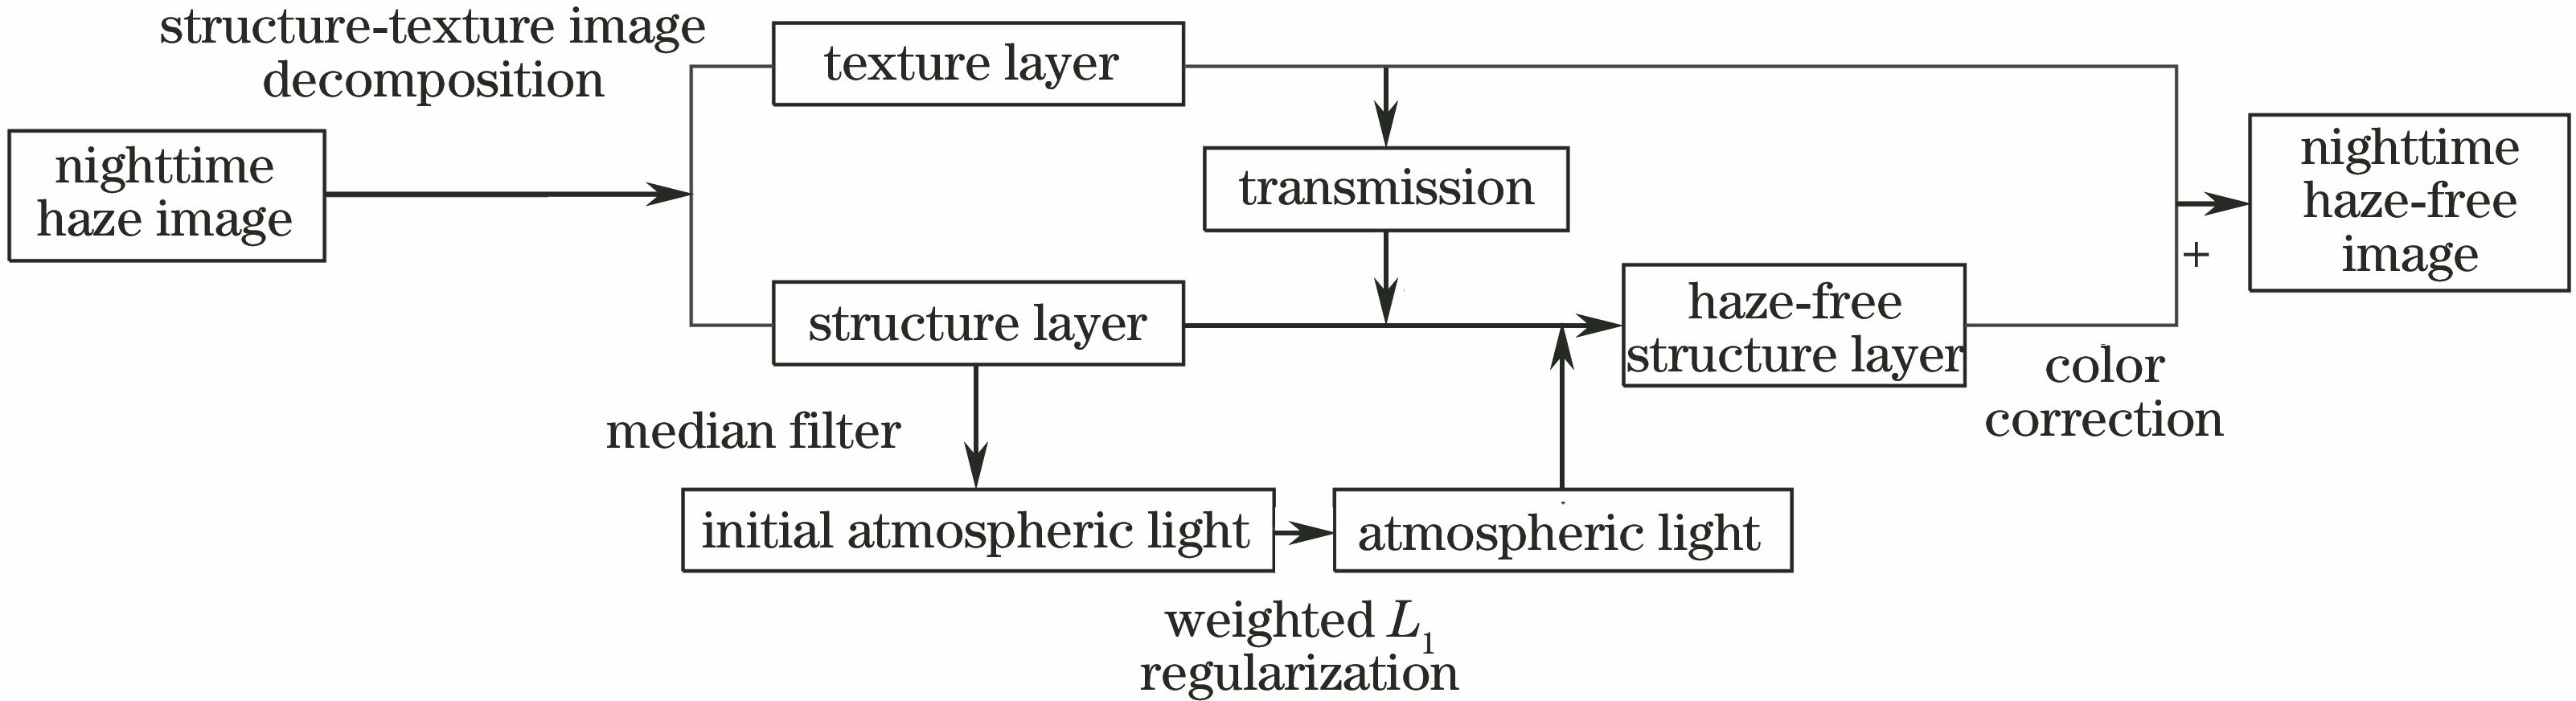 Dehazing process of nighttime haze image in the proposed algorithm